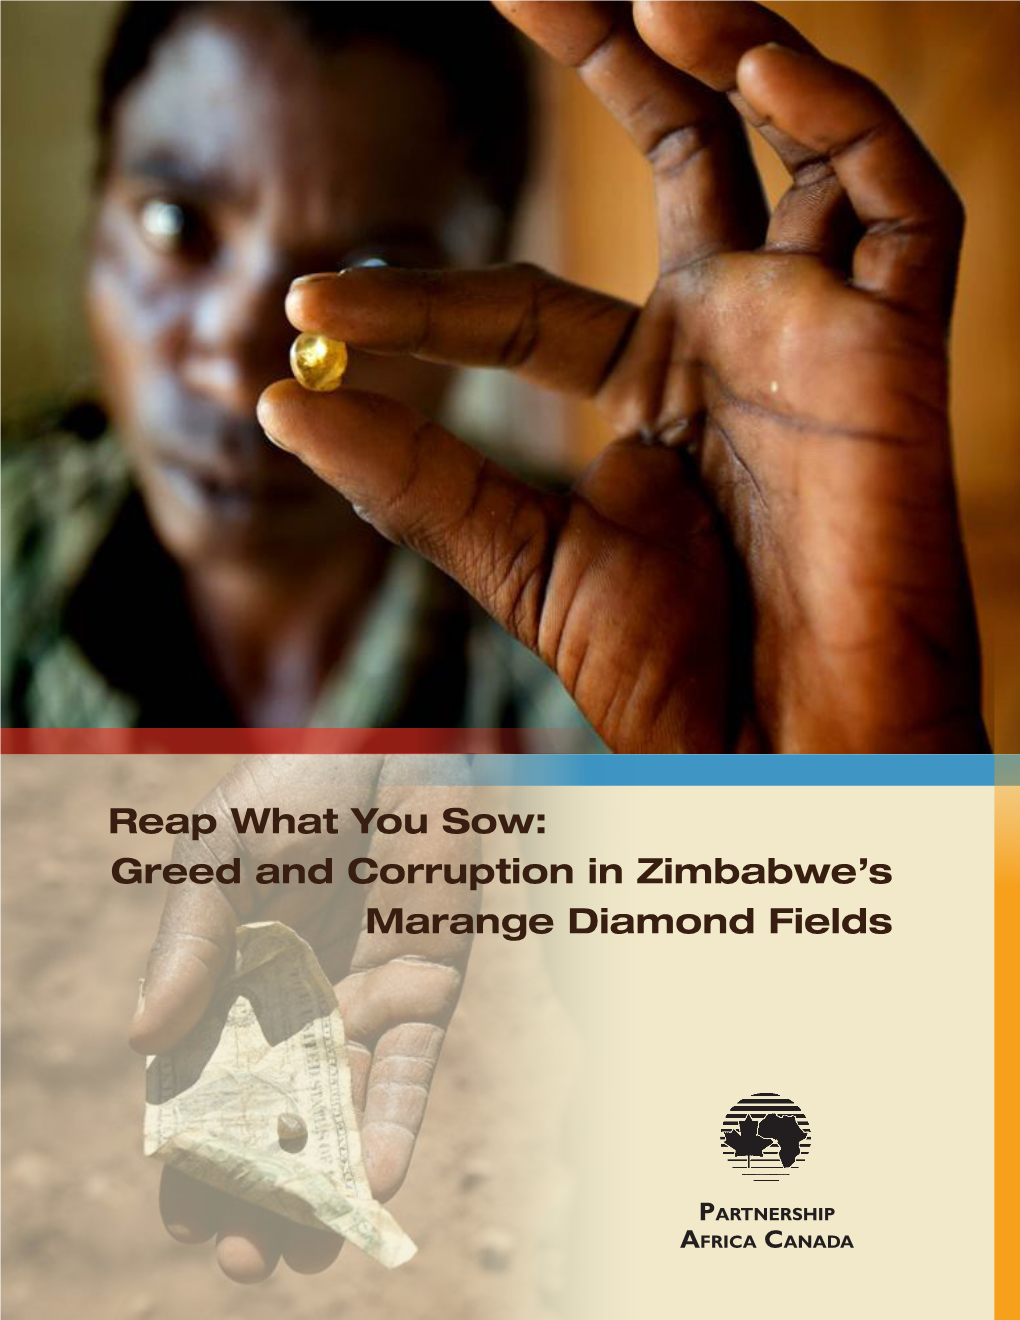 Reap What You Sow: Greed and Corruption in Zimbabwe's Marange